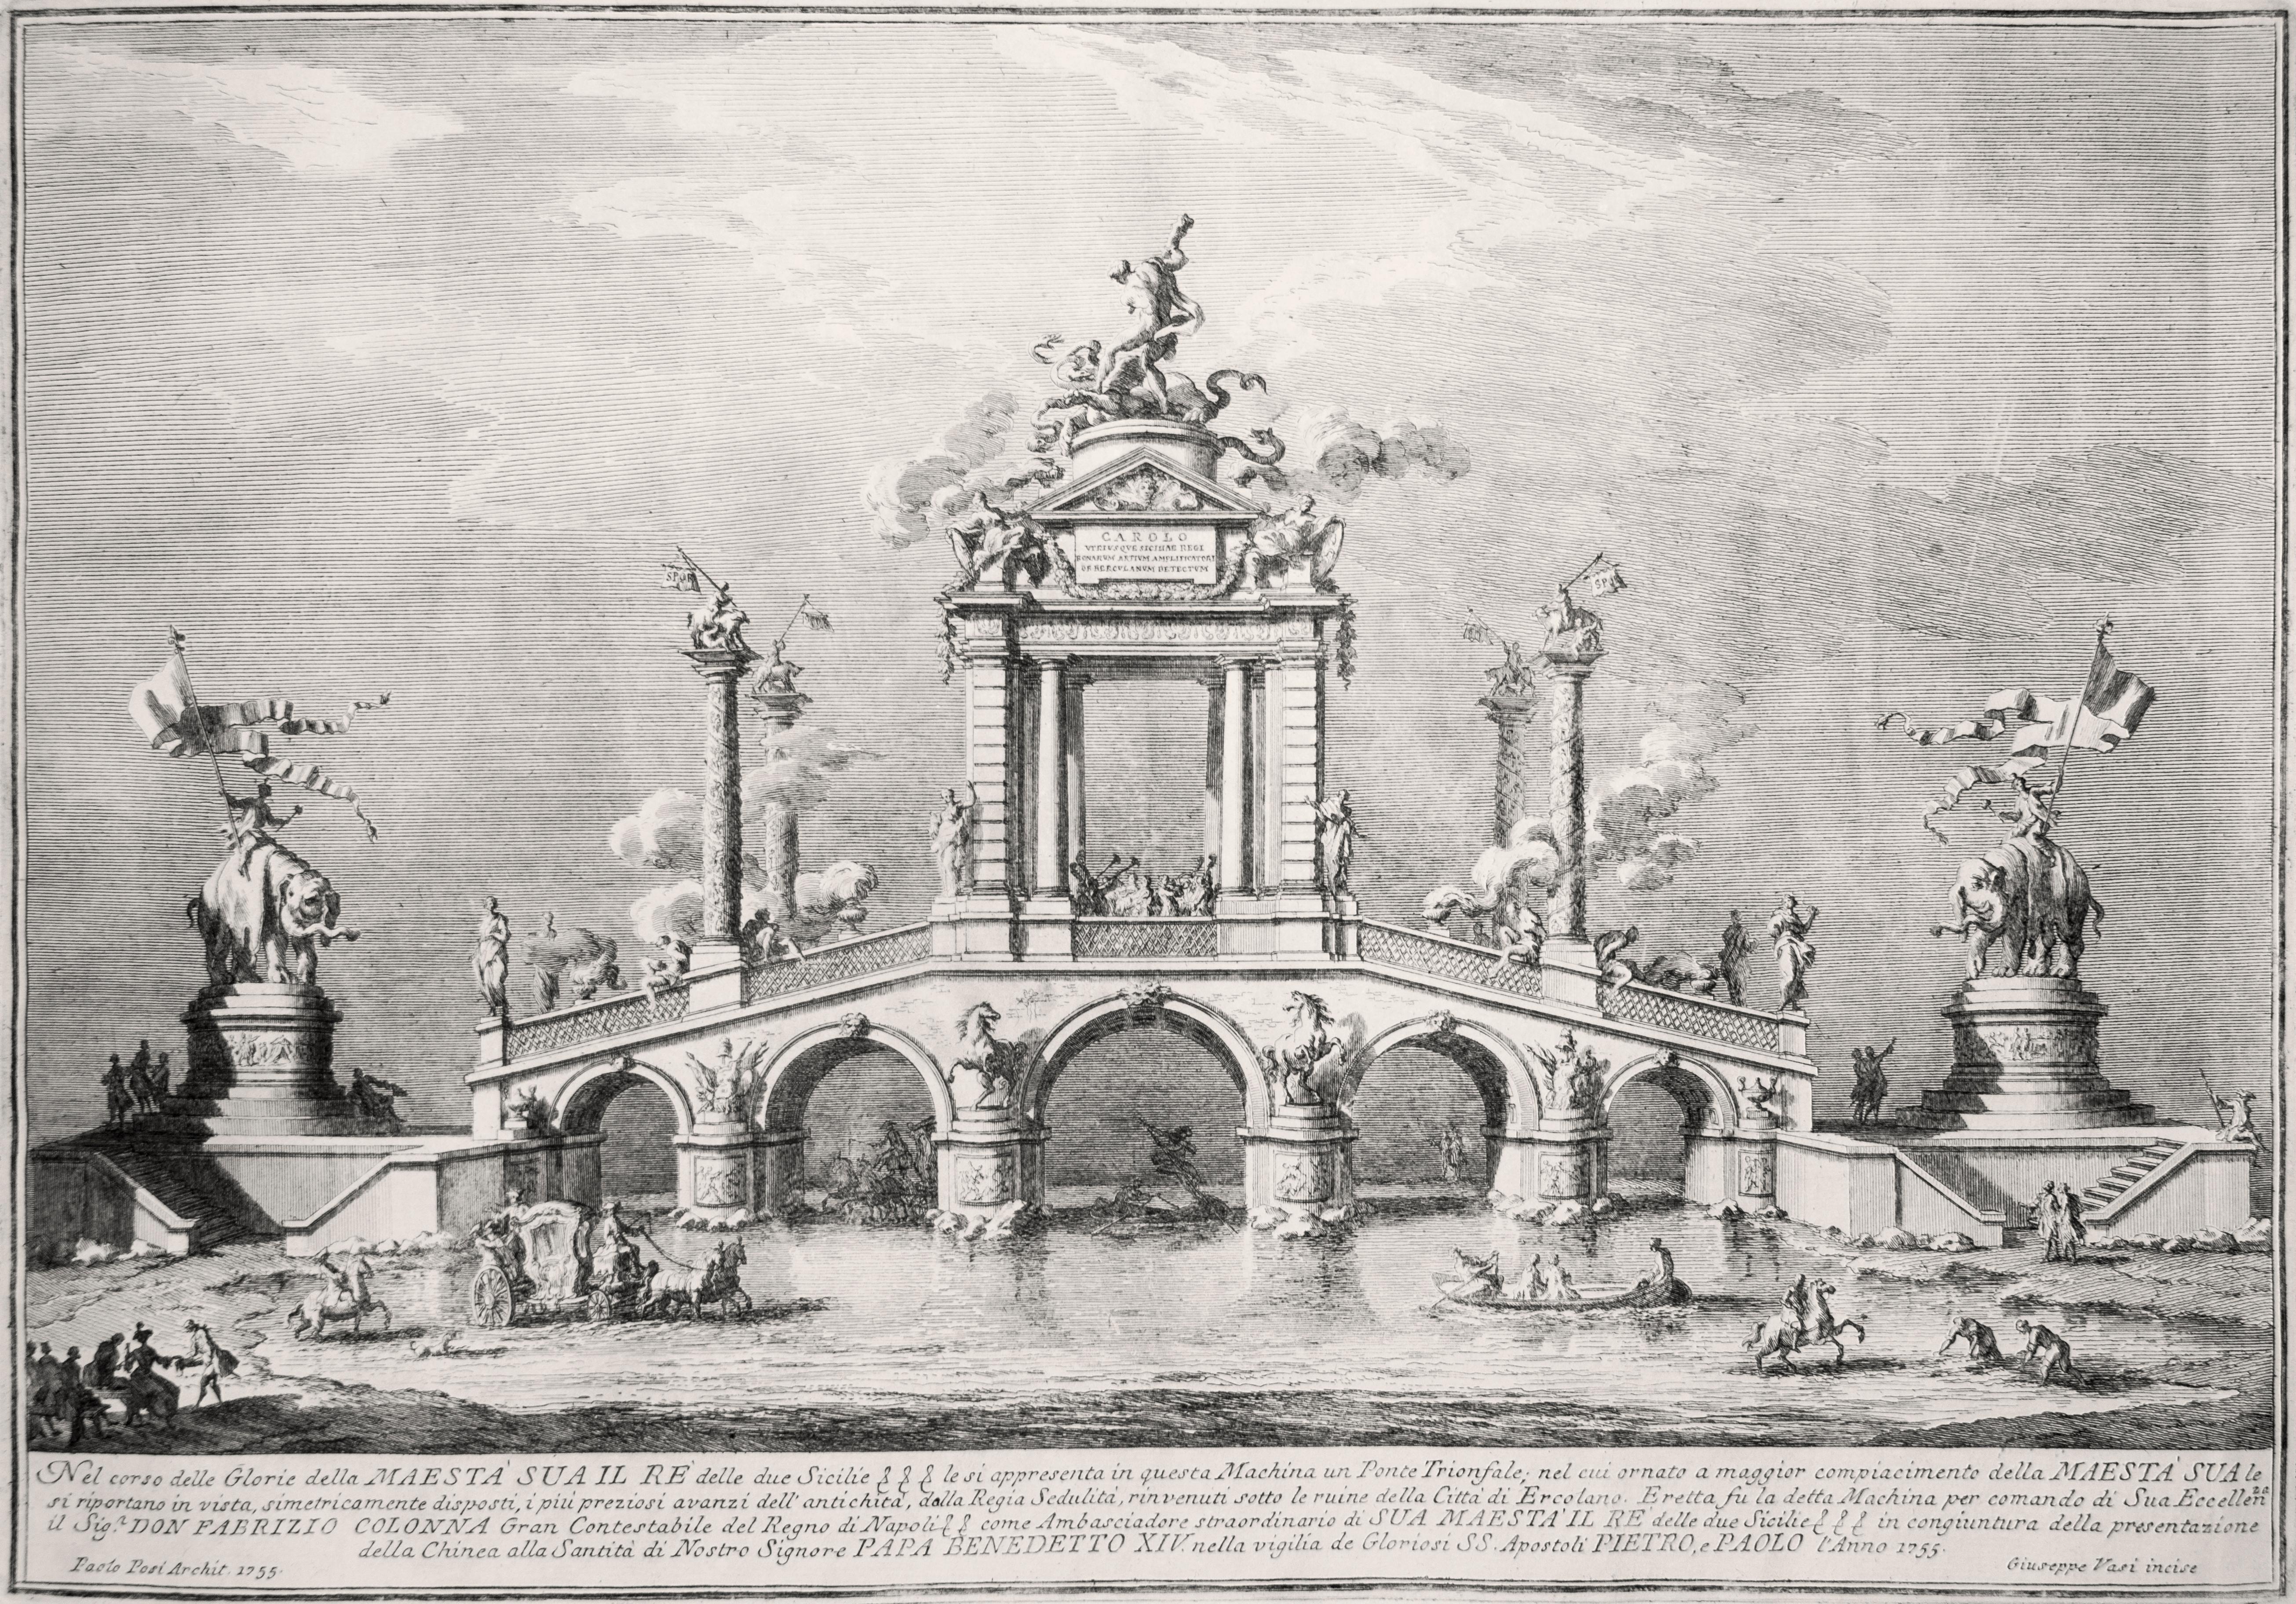 English Title: "The Triumphal Bridge”

Image dimensions: 38x54.2 cm. 

Beautiful Artist's Proof, representing the apparatus for firework built in occasion of the Feast of S. Peter and Paolo (29th June 1755) by Paolo Posi. The subjet of this